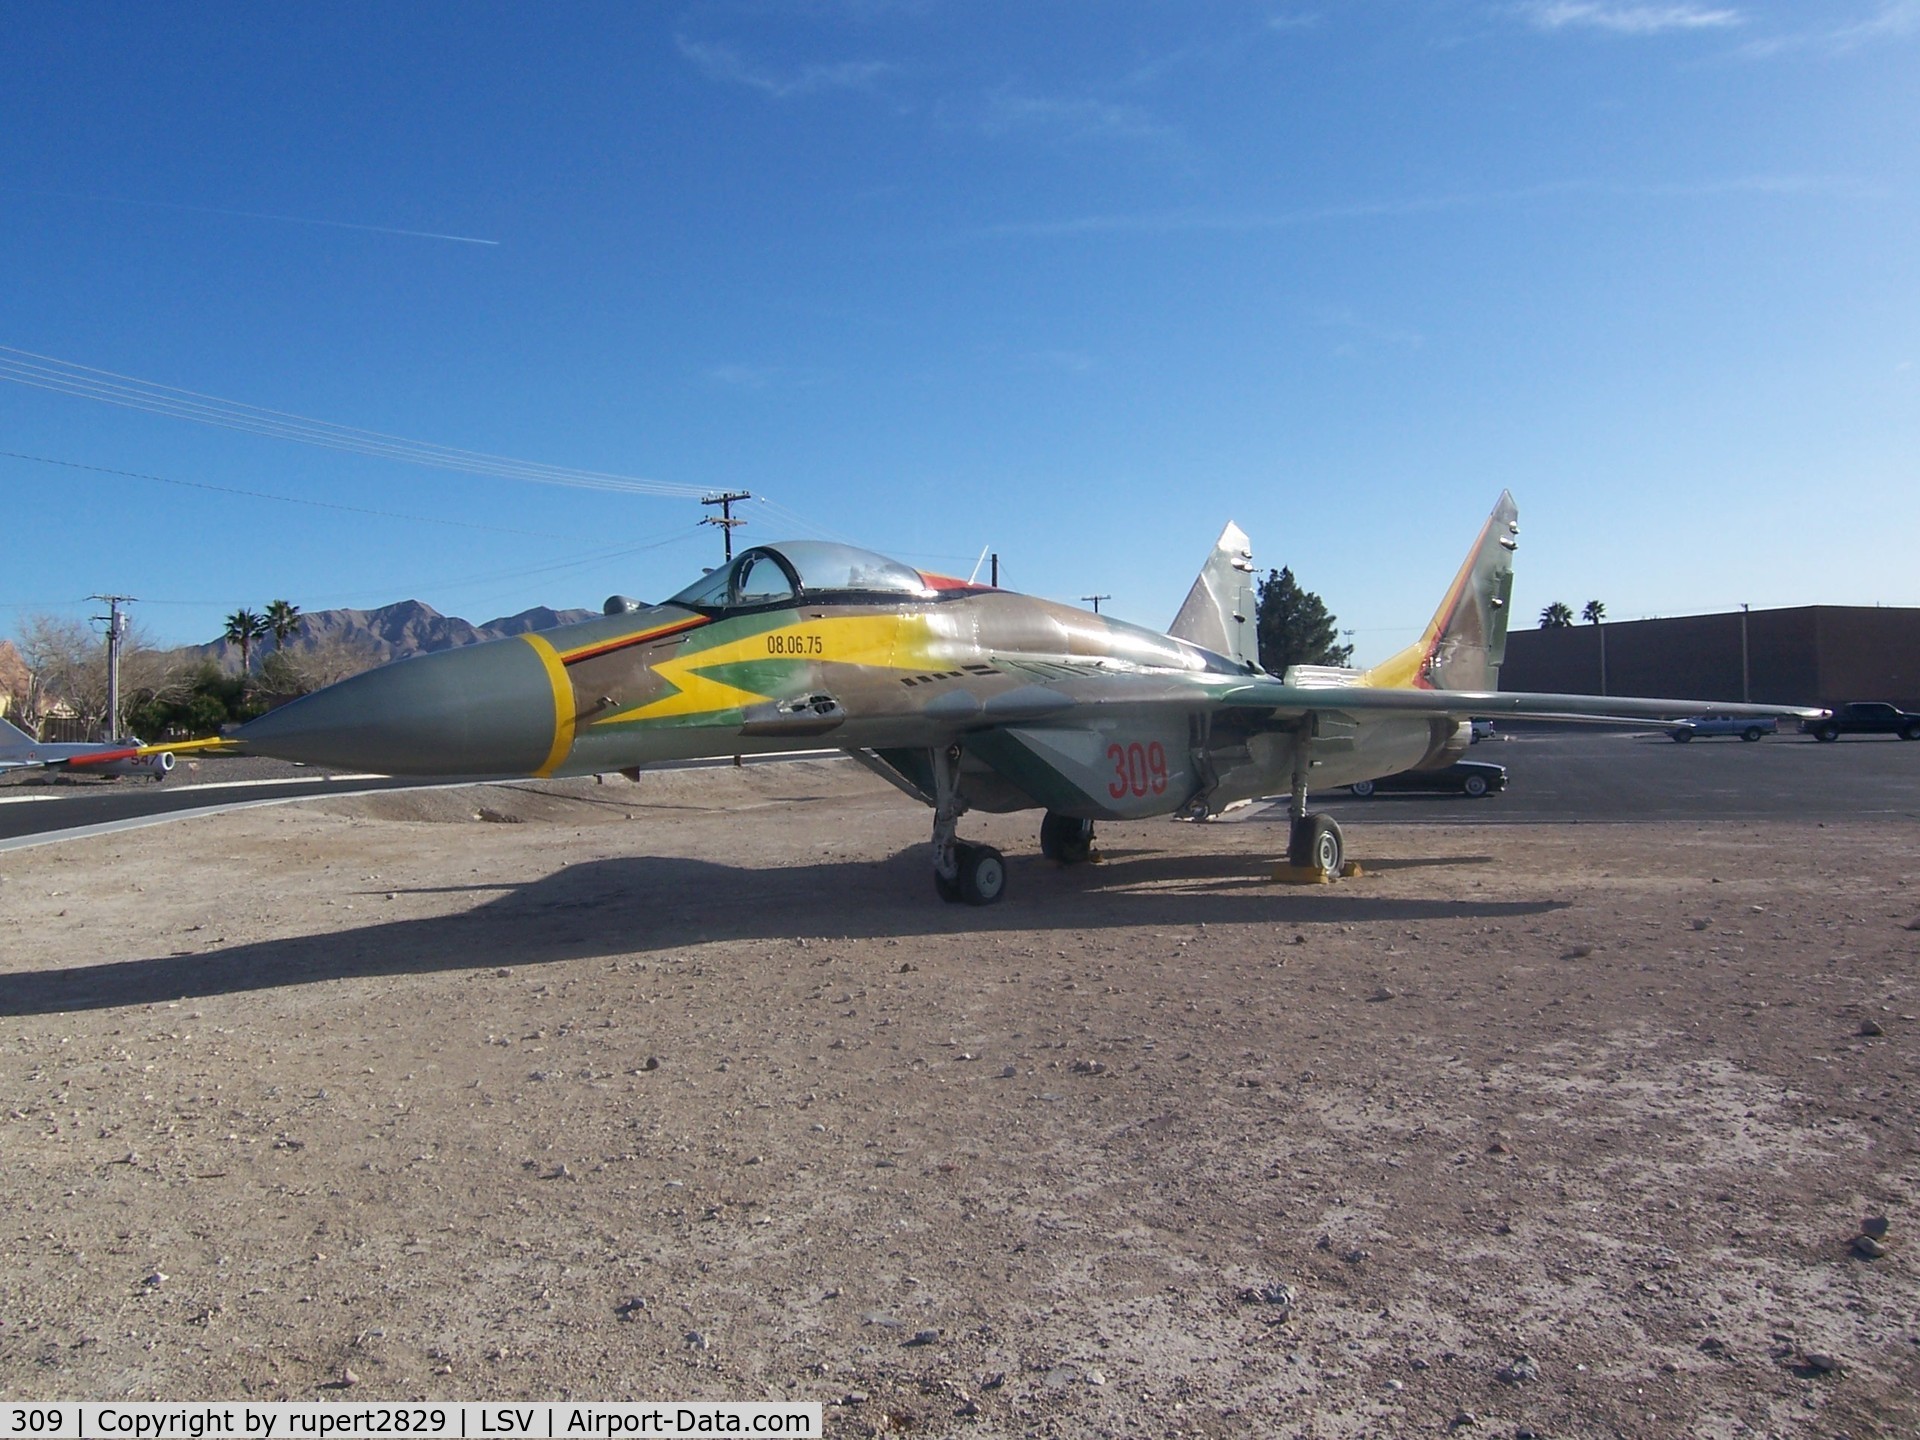 309, Mikoyan-Gurevich MiG-29A C/N Not found 309, Mig 29  infront of Nellis AFB Threat training center